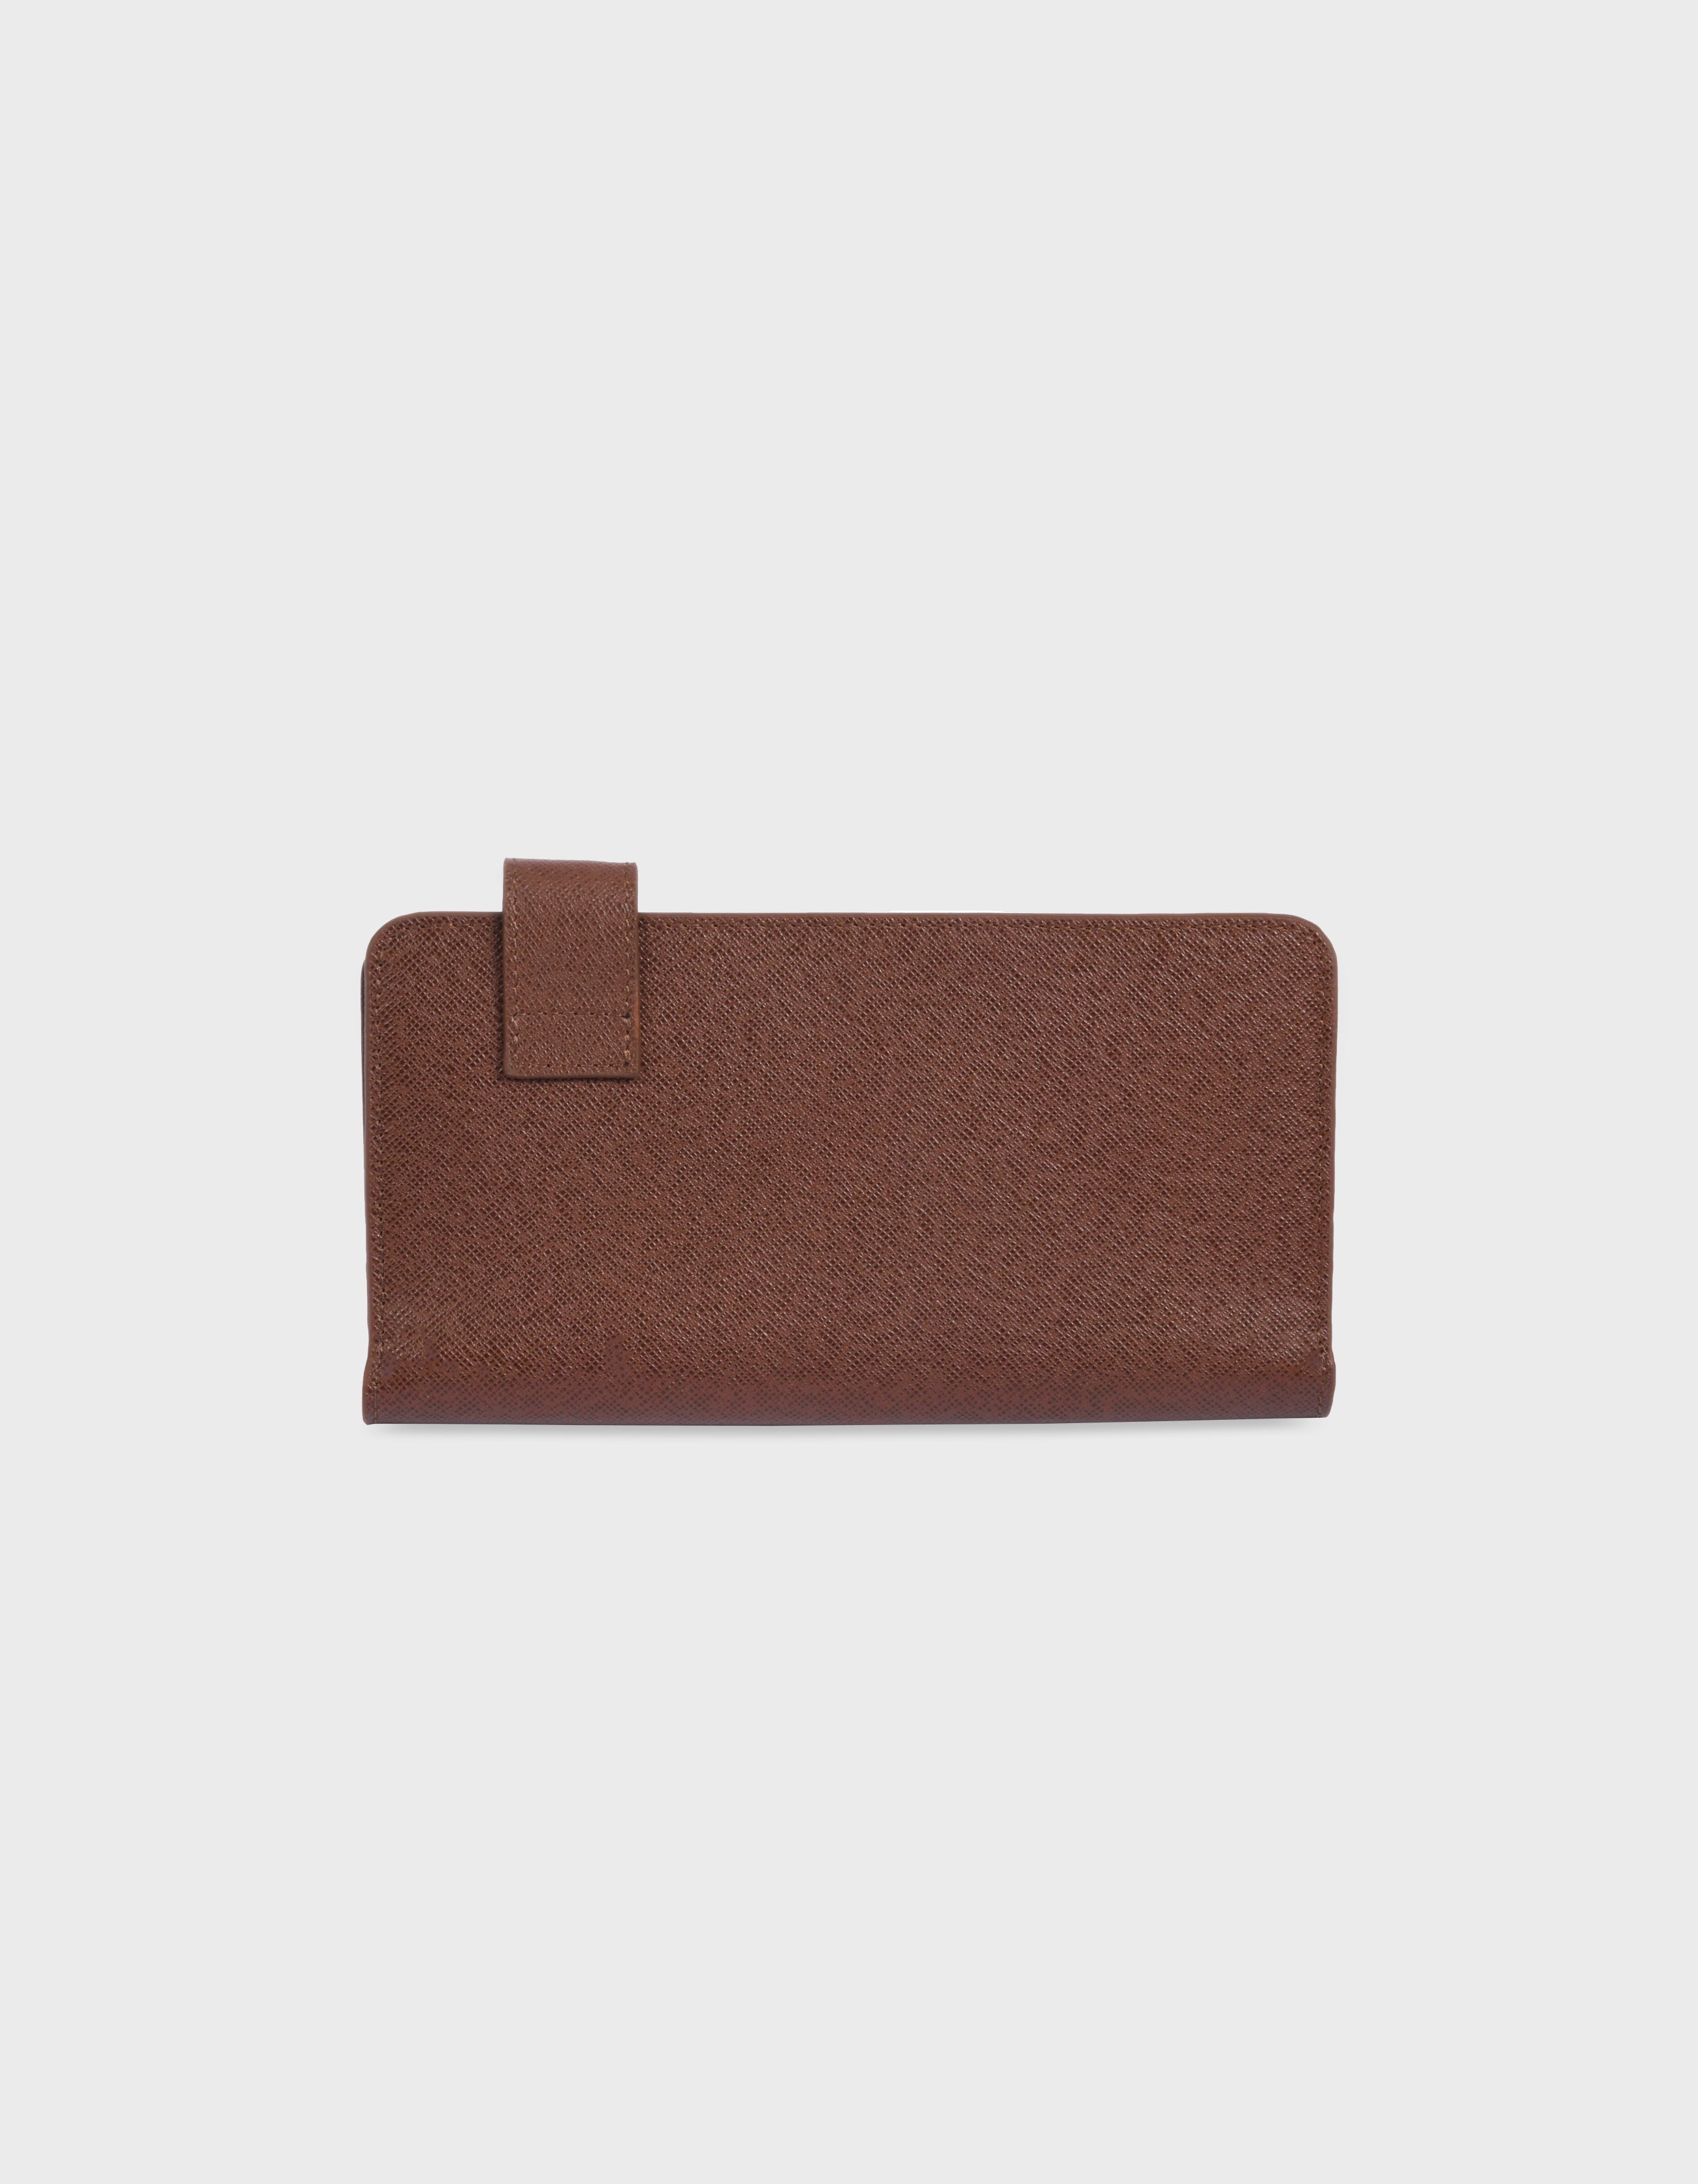 Fluctus Long Wallet - Finest Quality HiVa Atelier GmbH Leather Accessories